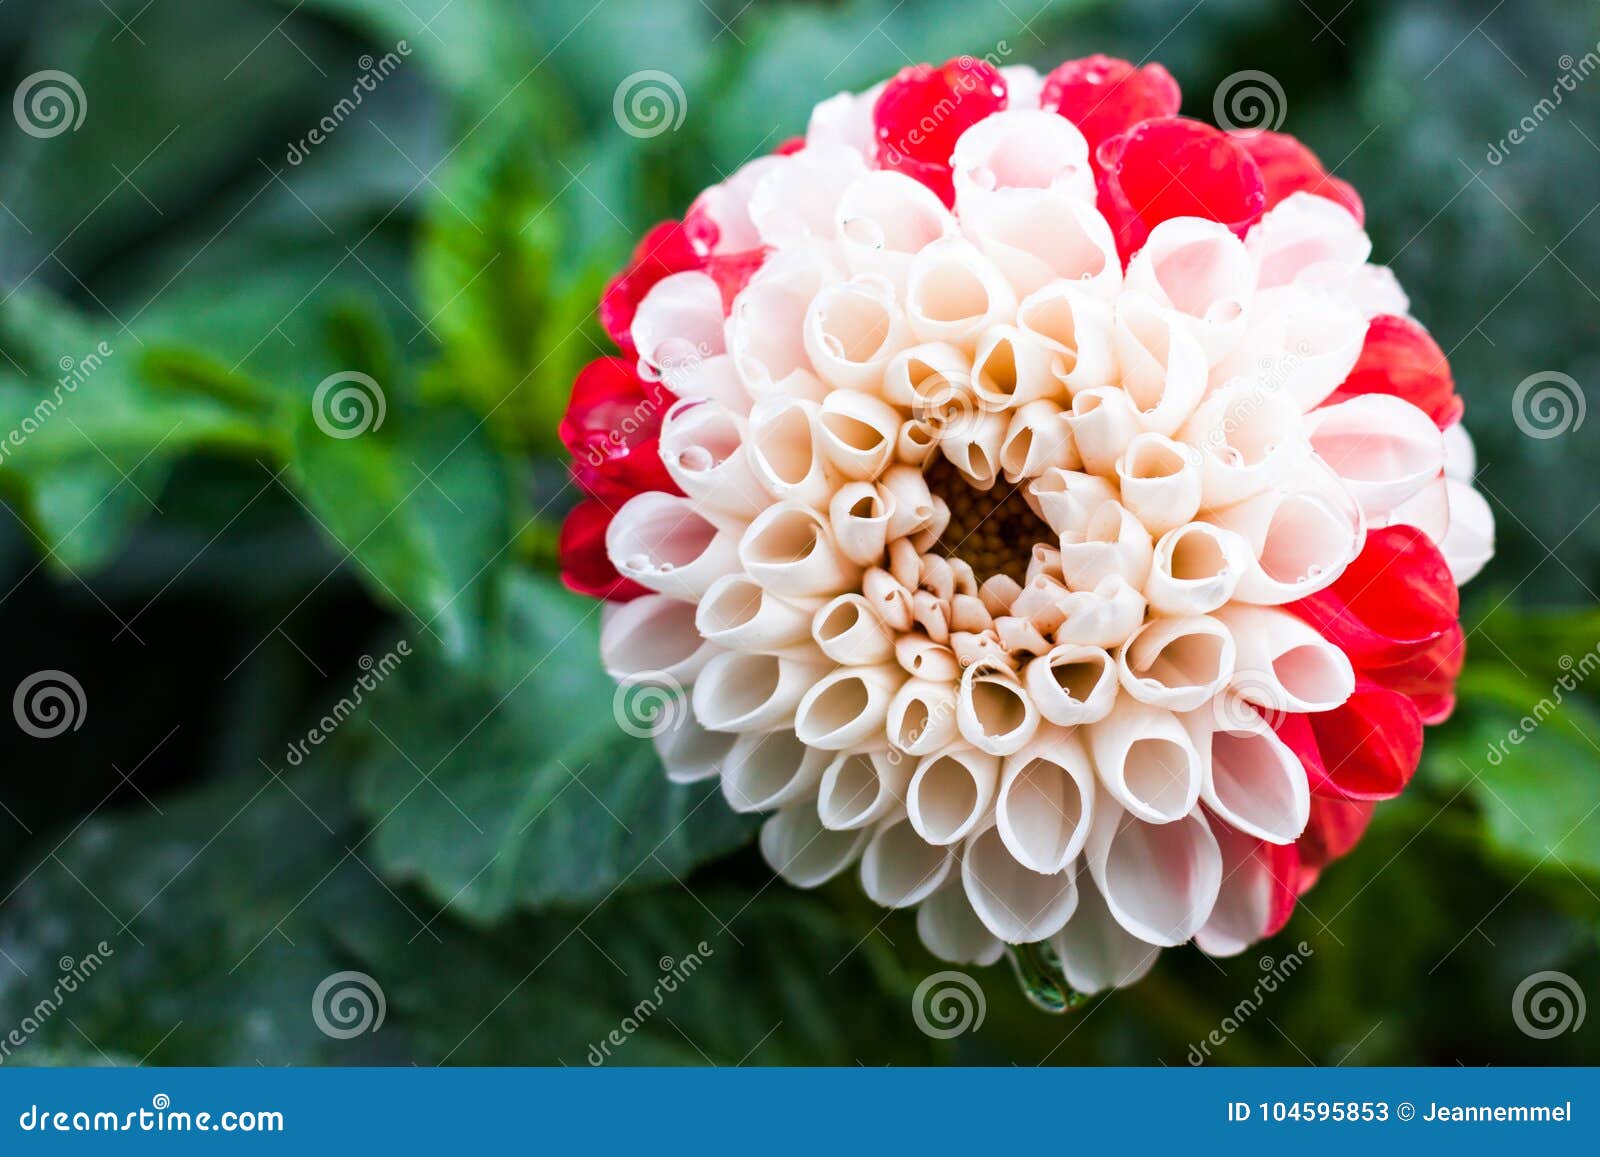 Close-up of Bicolor White and Red Dahlia Flower Stock Image - Image of ...